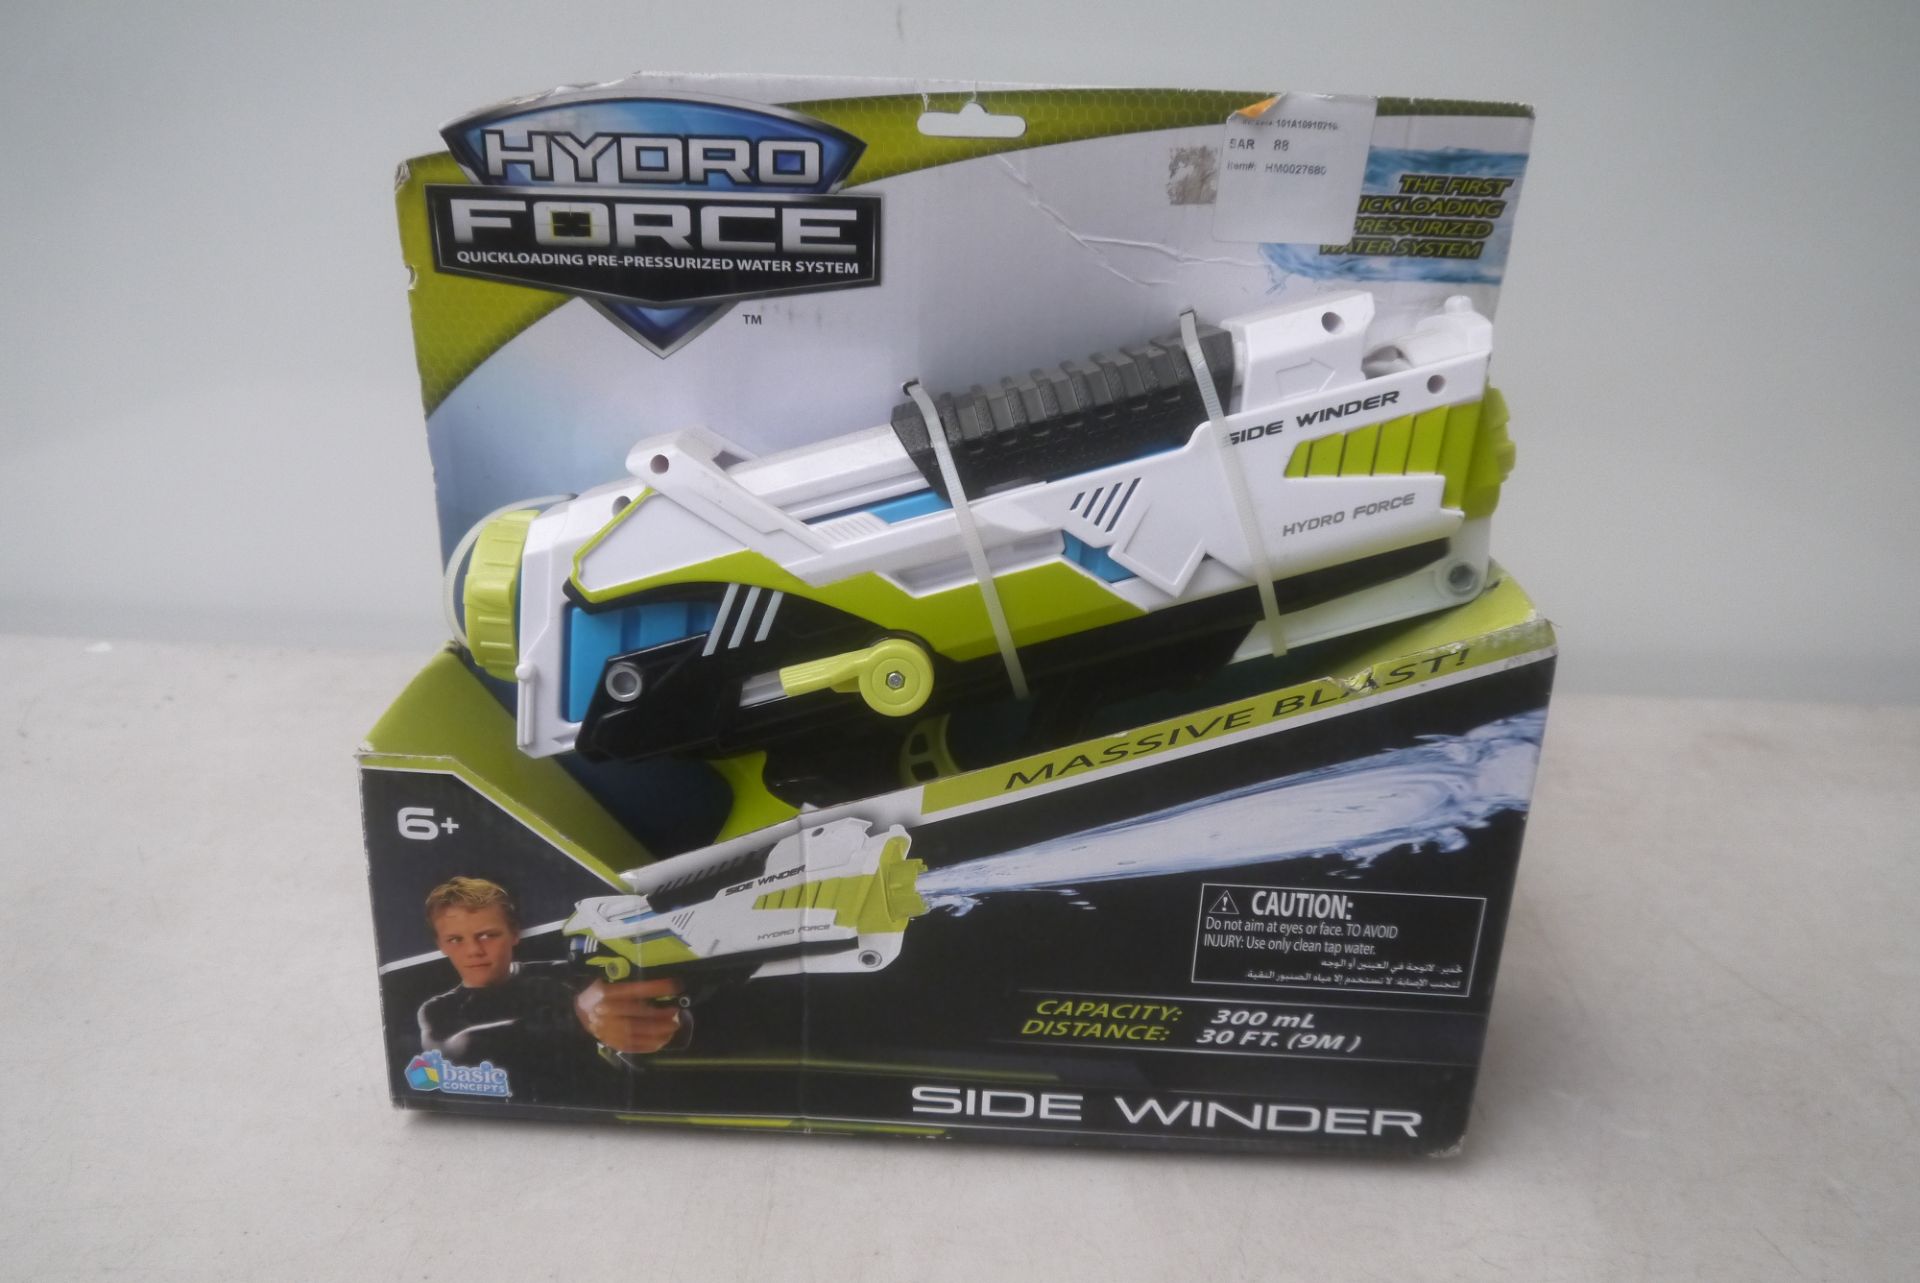 Hydro Force Side Winder, quick loading pre-pressurized water system, new and boxed. RRP £20 on Ebay.